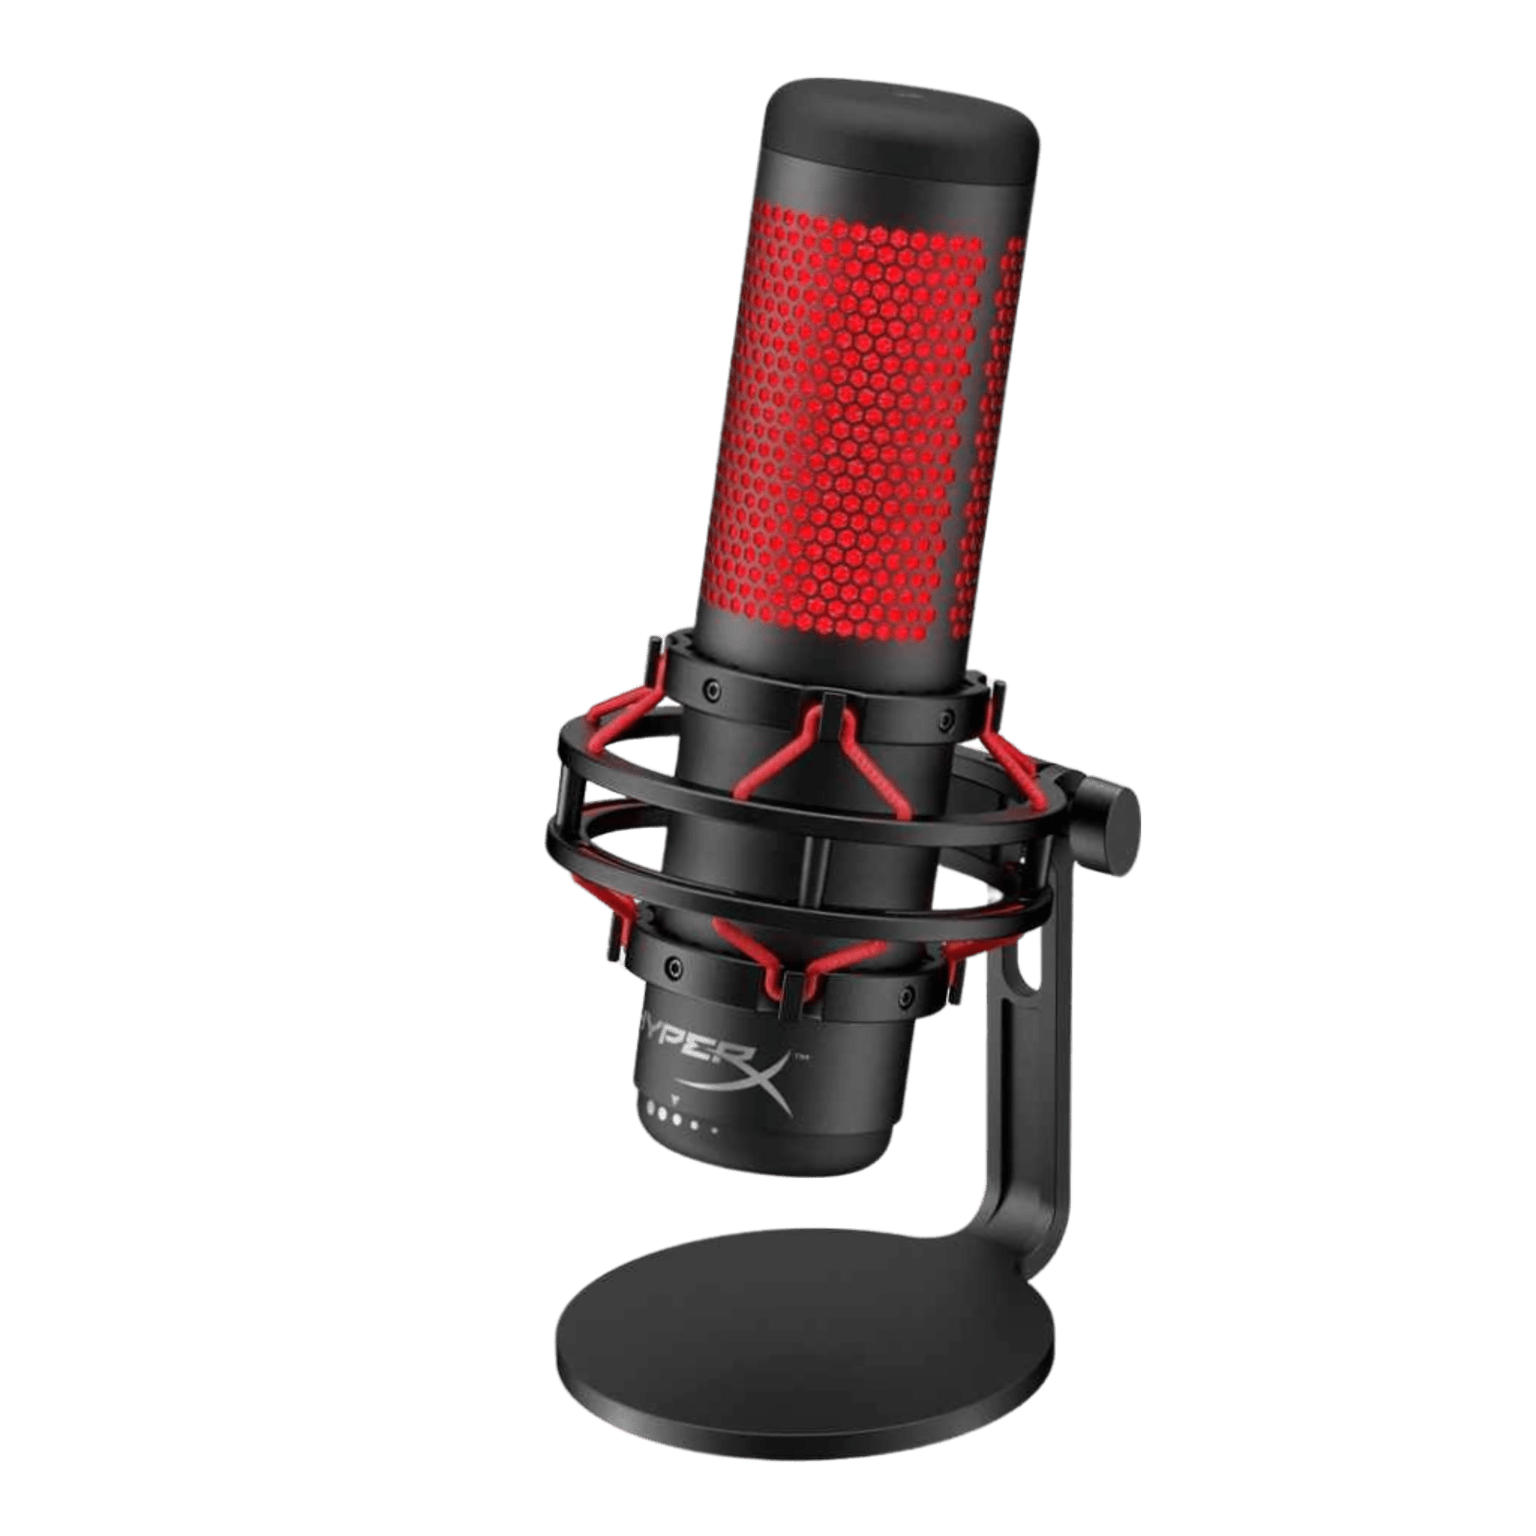 Kingston HyperX microphone on a desk stand